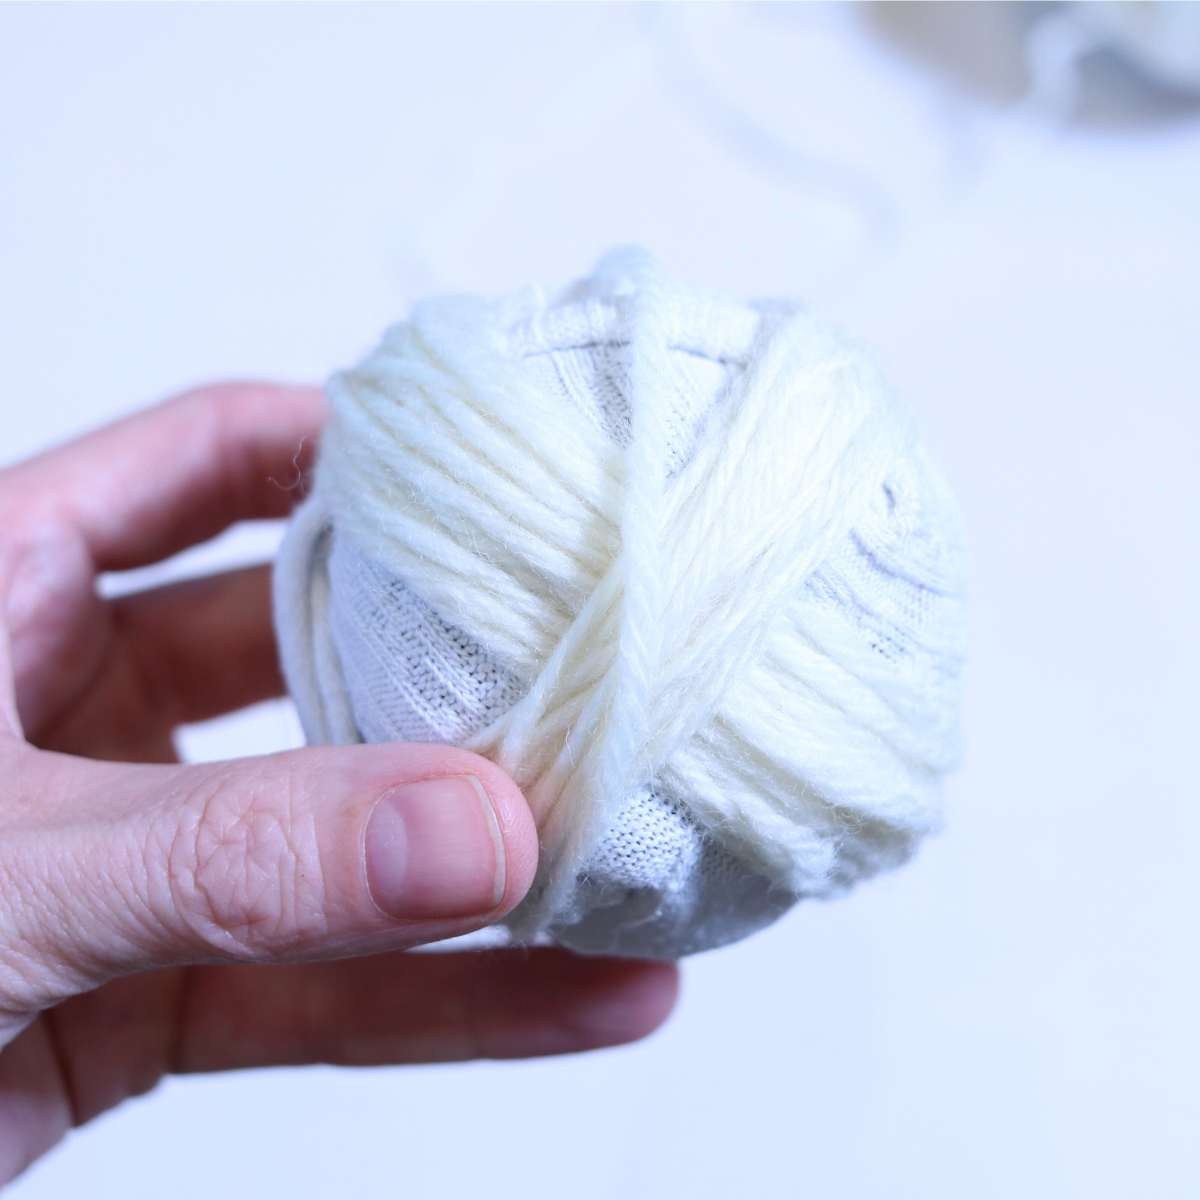 Wrapping the cream colored wool yarn to create a homemade wool dryer ball.